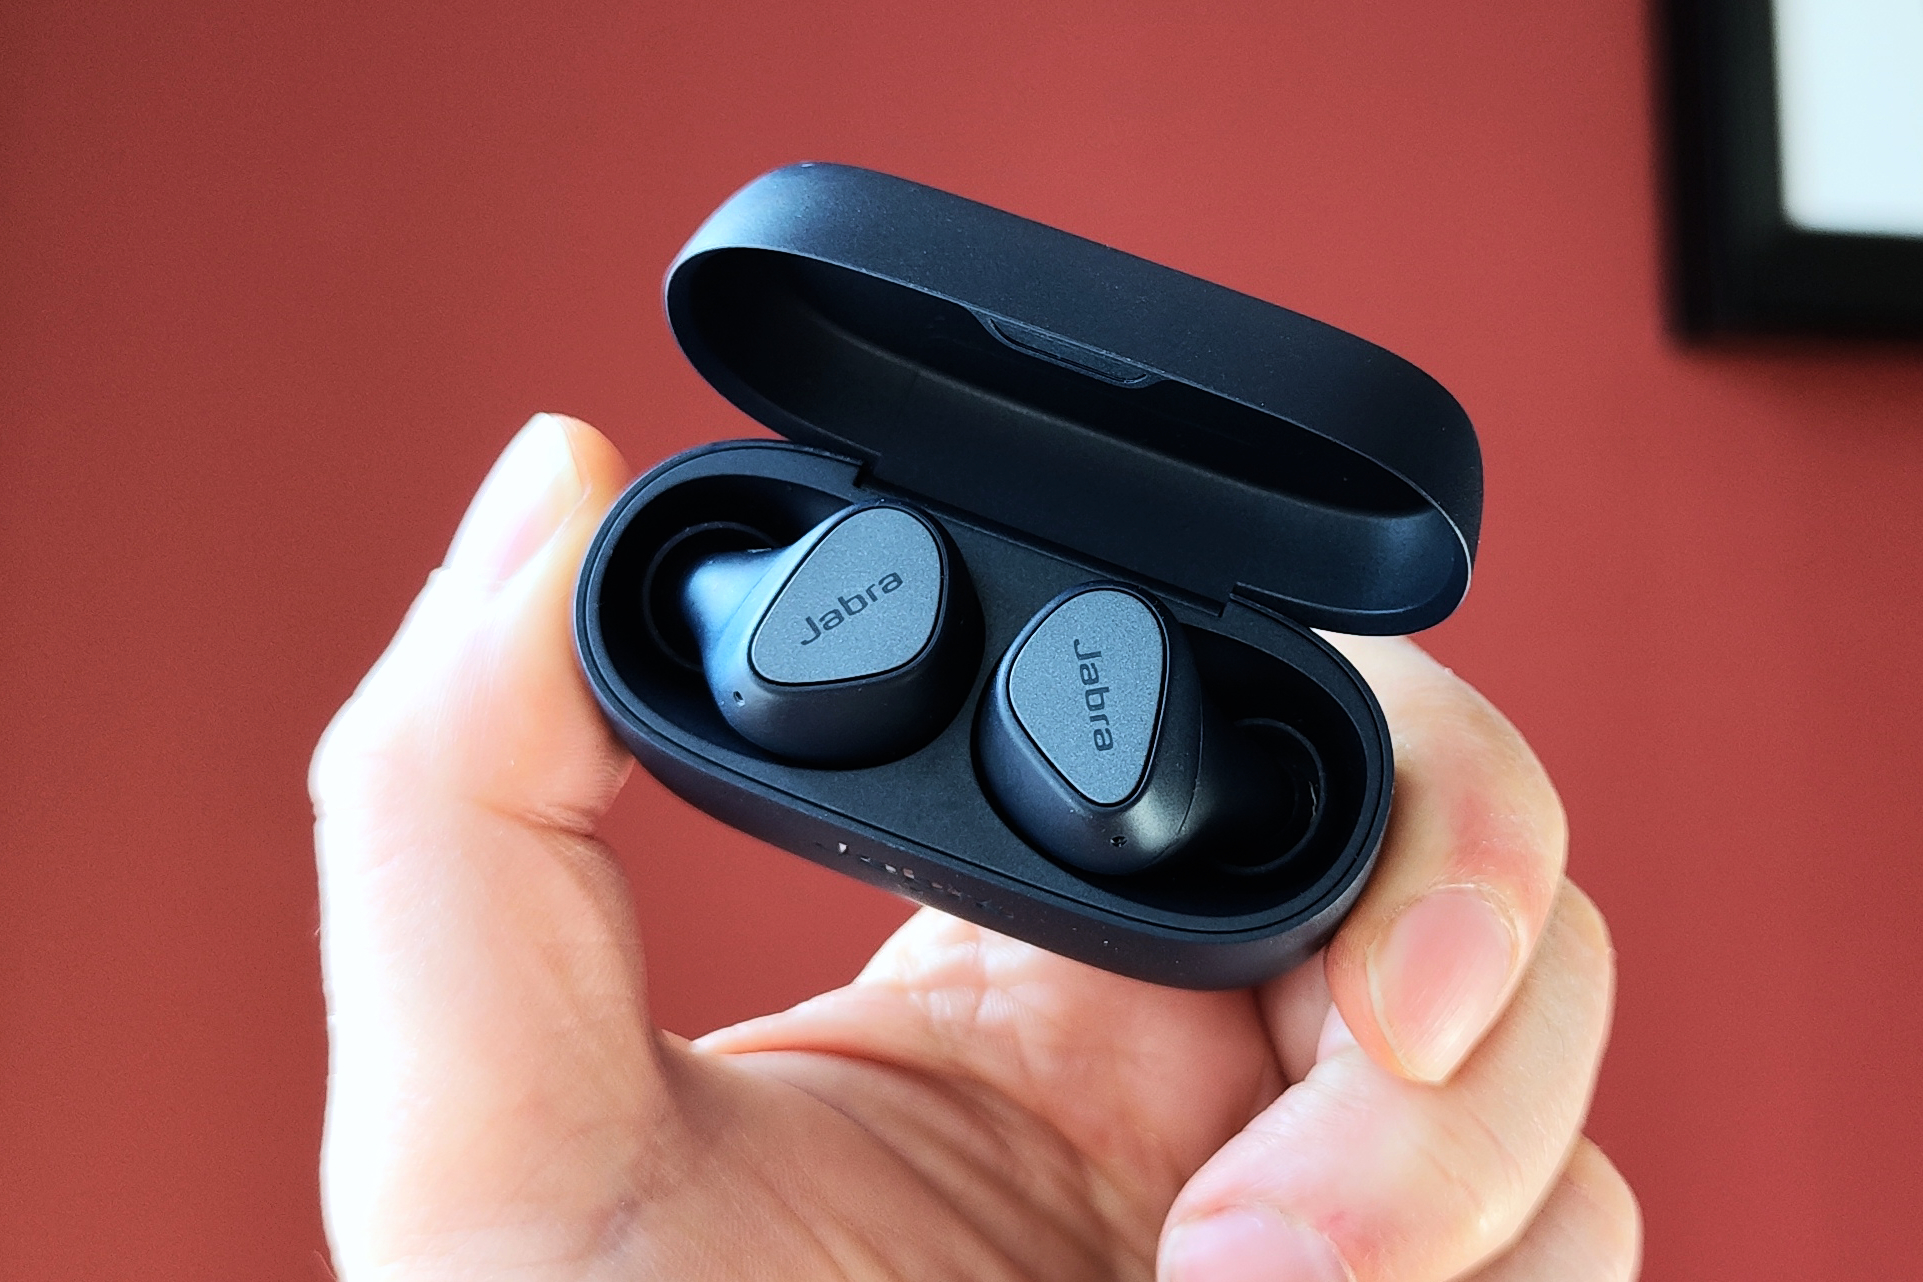 Jabra Elite 4 Review: everyday carry wireless earbuds